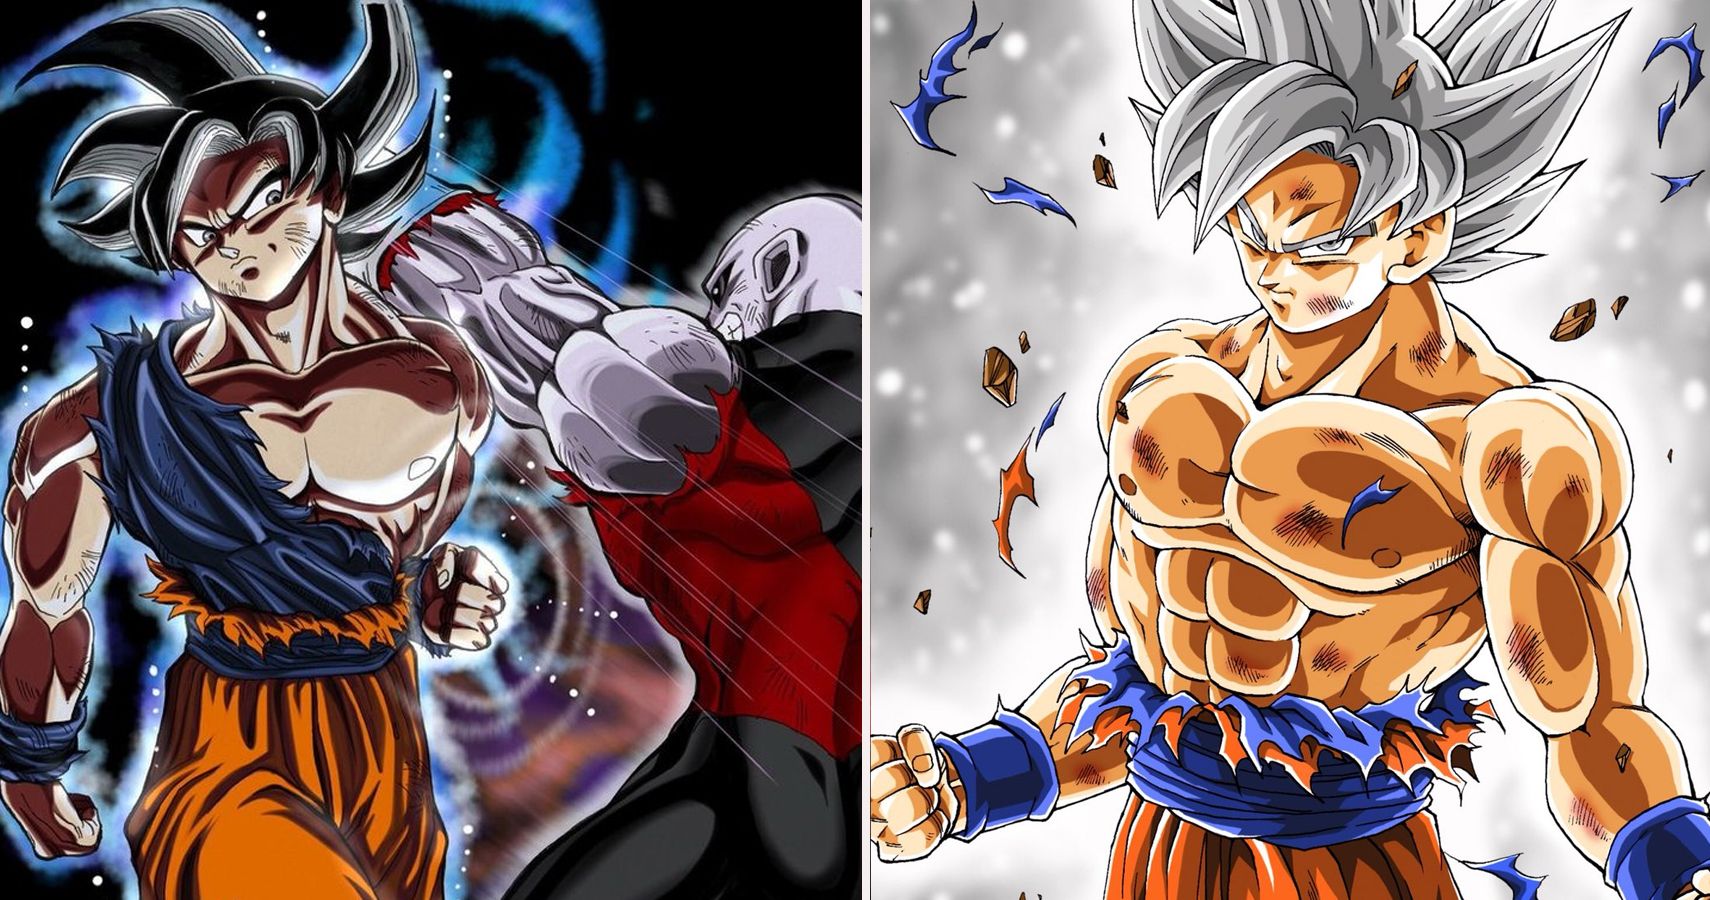 Goku's New Transformation: Blue Kaioken with White Hair - wide 4